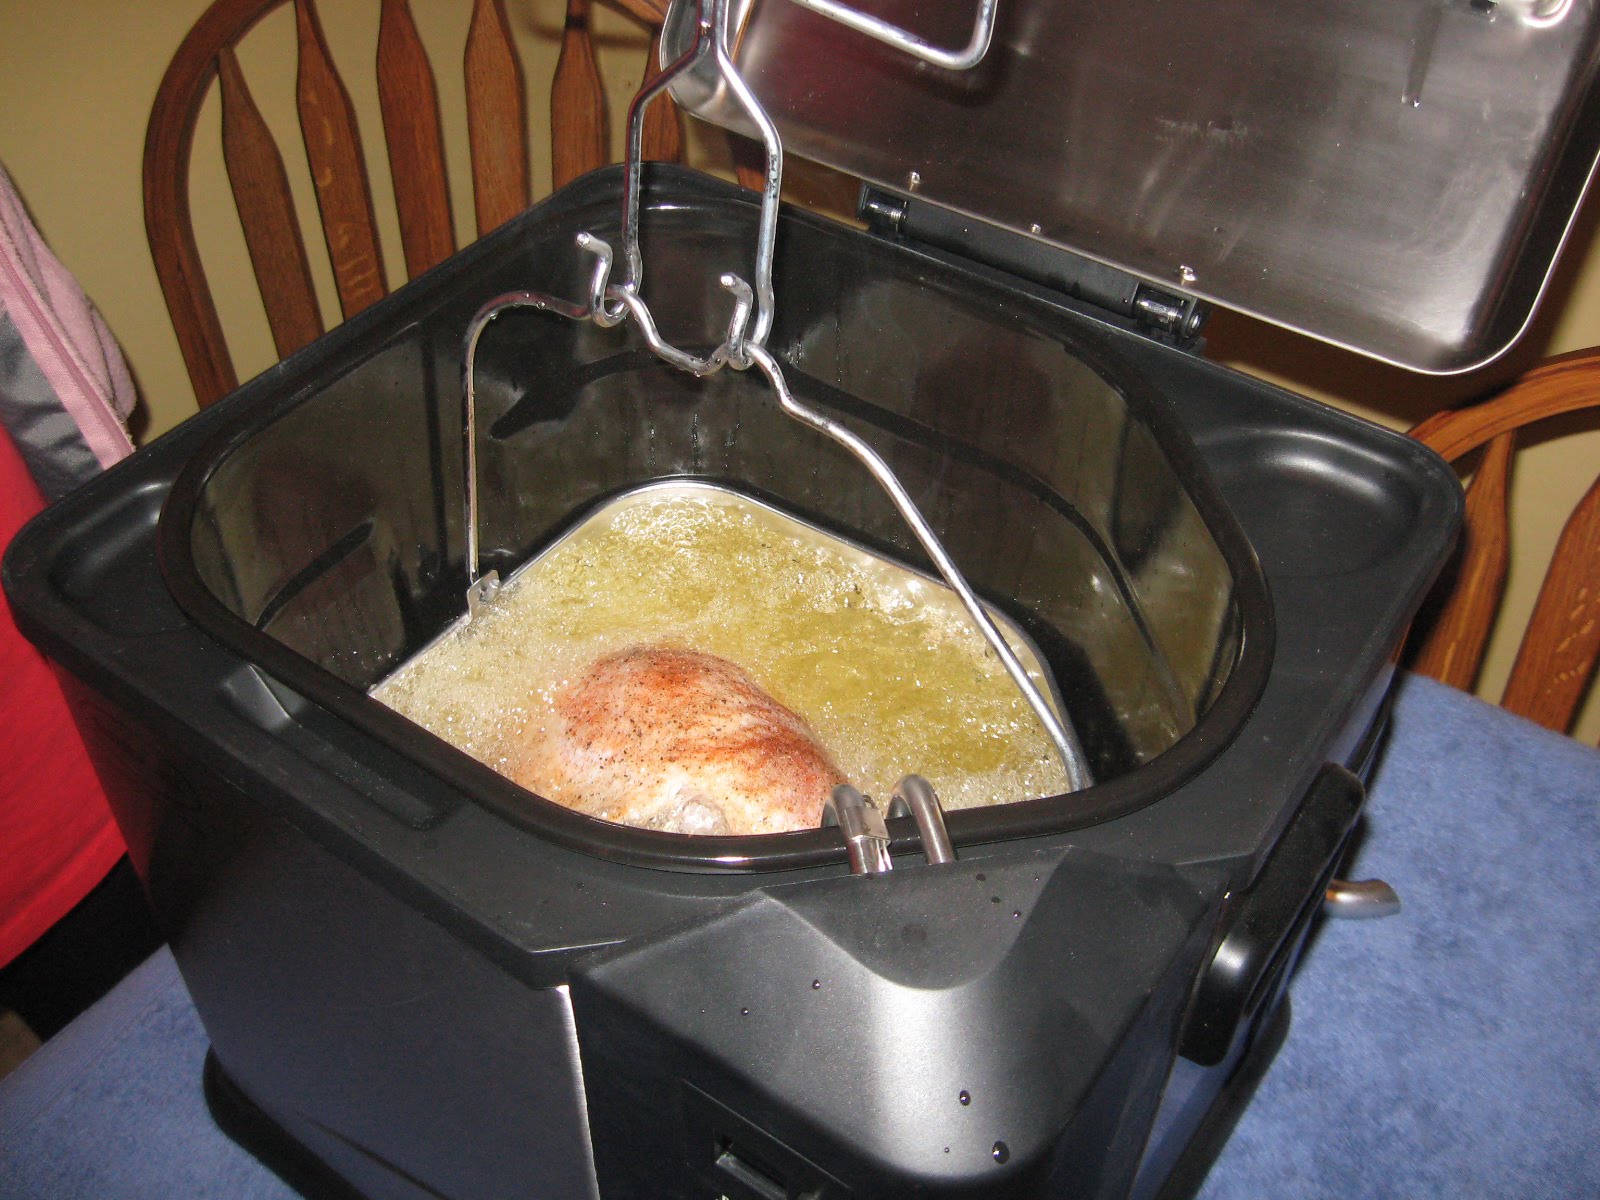 Barbecue Master: Fried Turkey in the Masterbuilt ButterBall Indoor